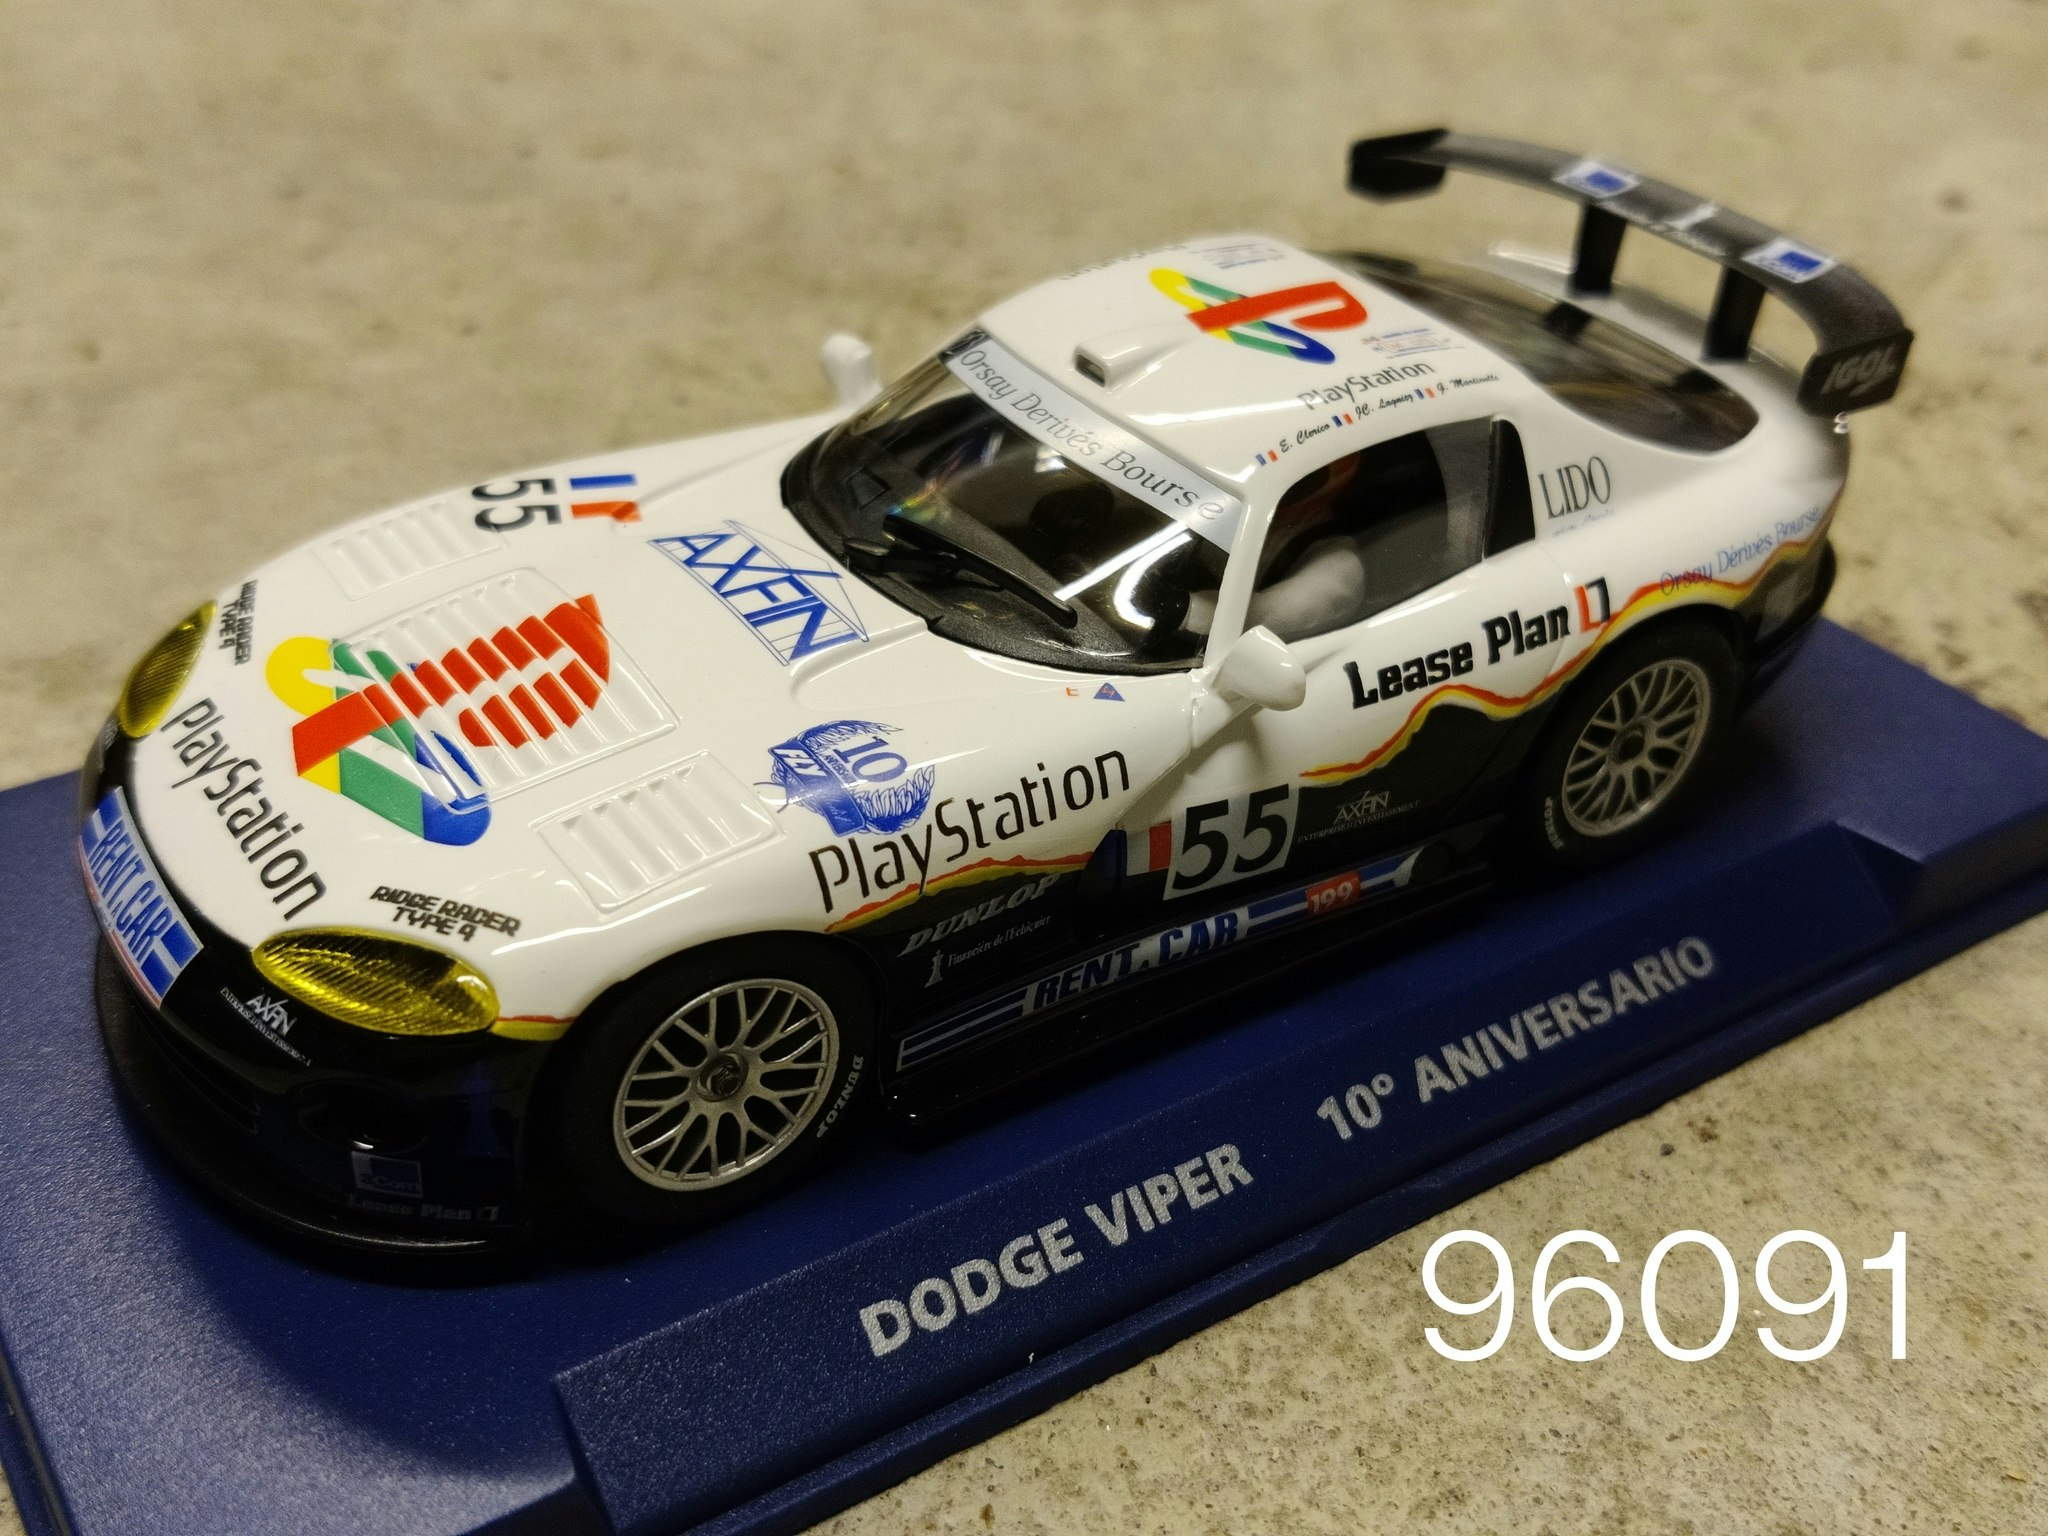 FLY Car Model - Dodge Viper GTS-R 10th Anniversary Edition (400 SEK) I LAGER / IN STOCK